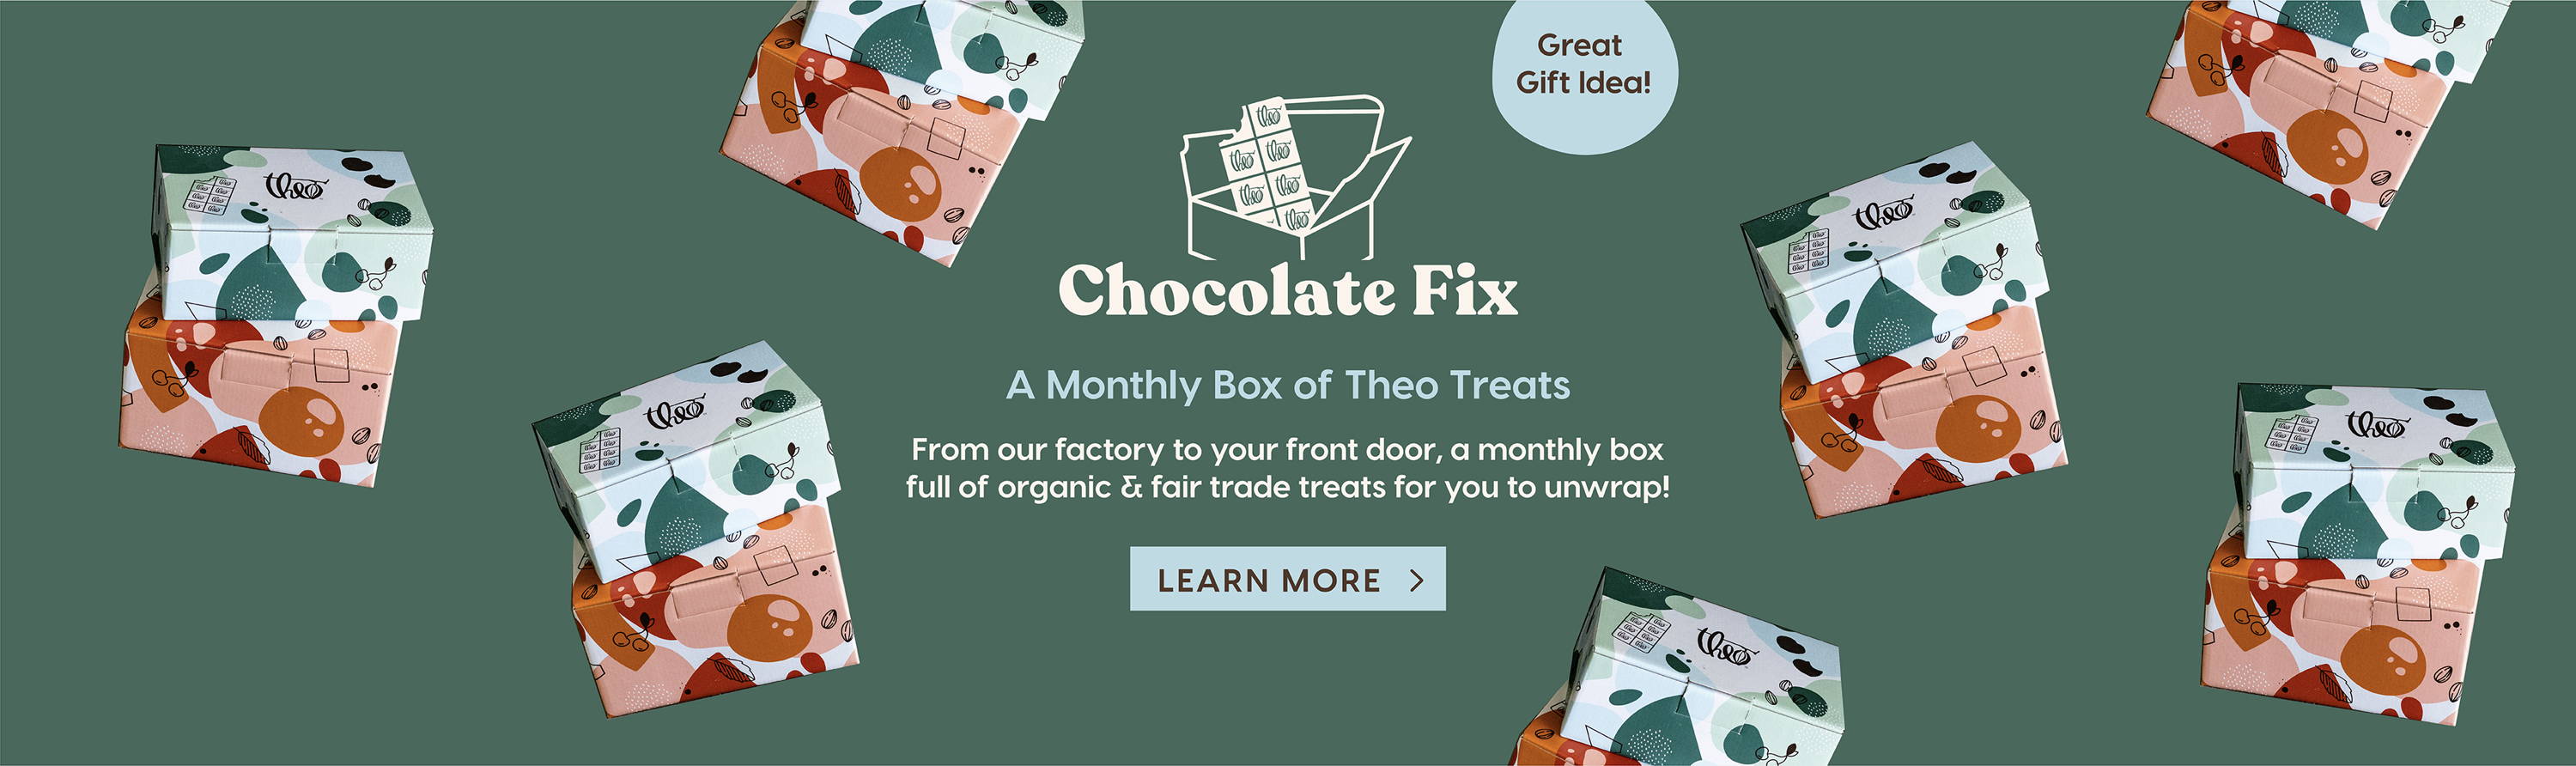 Chocolate Fix: A monthly box of Theo treats